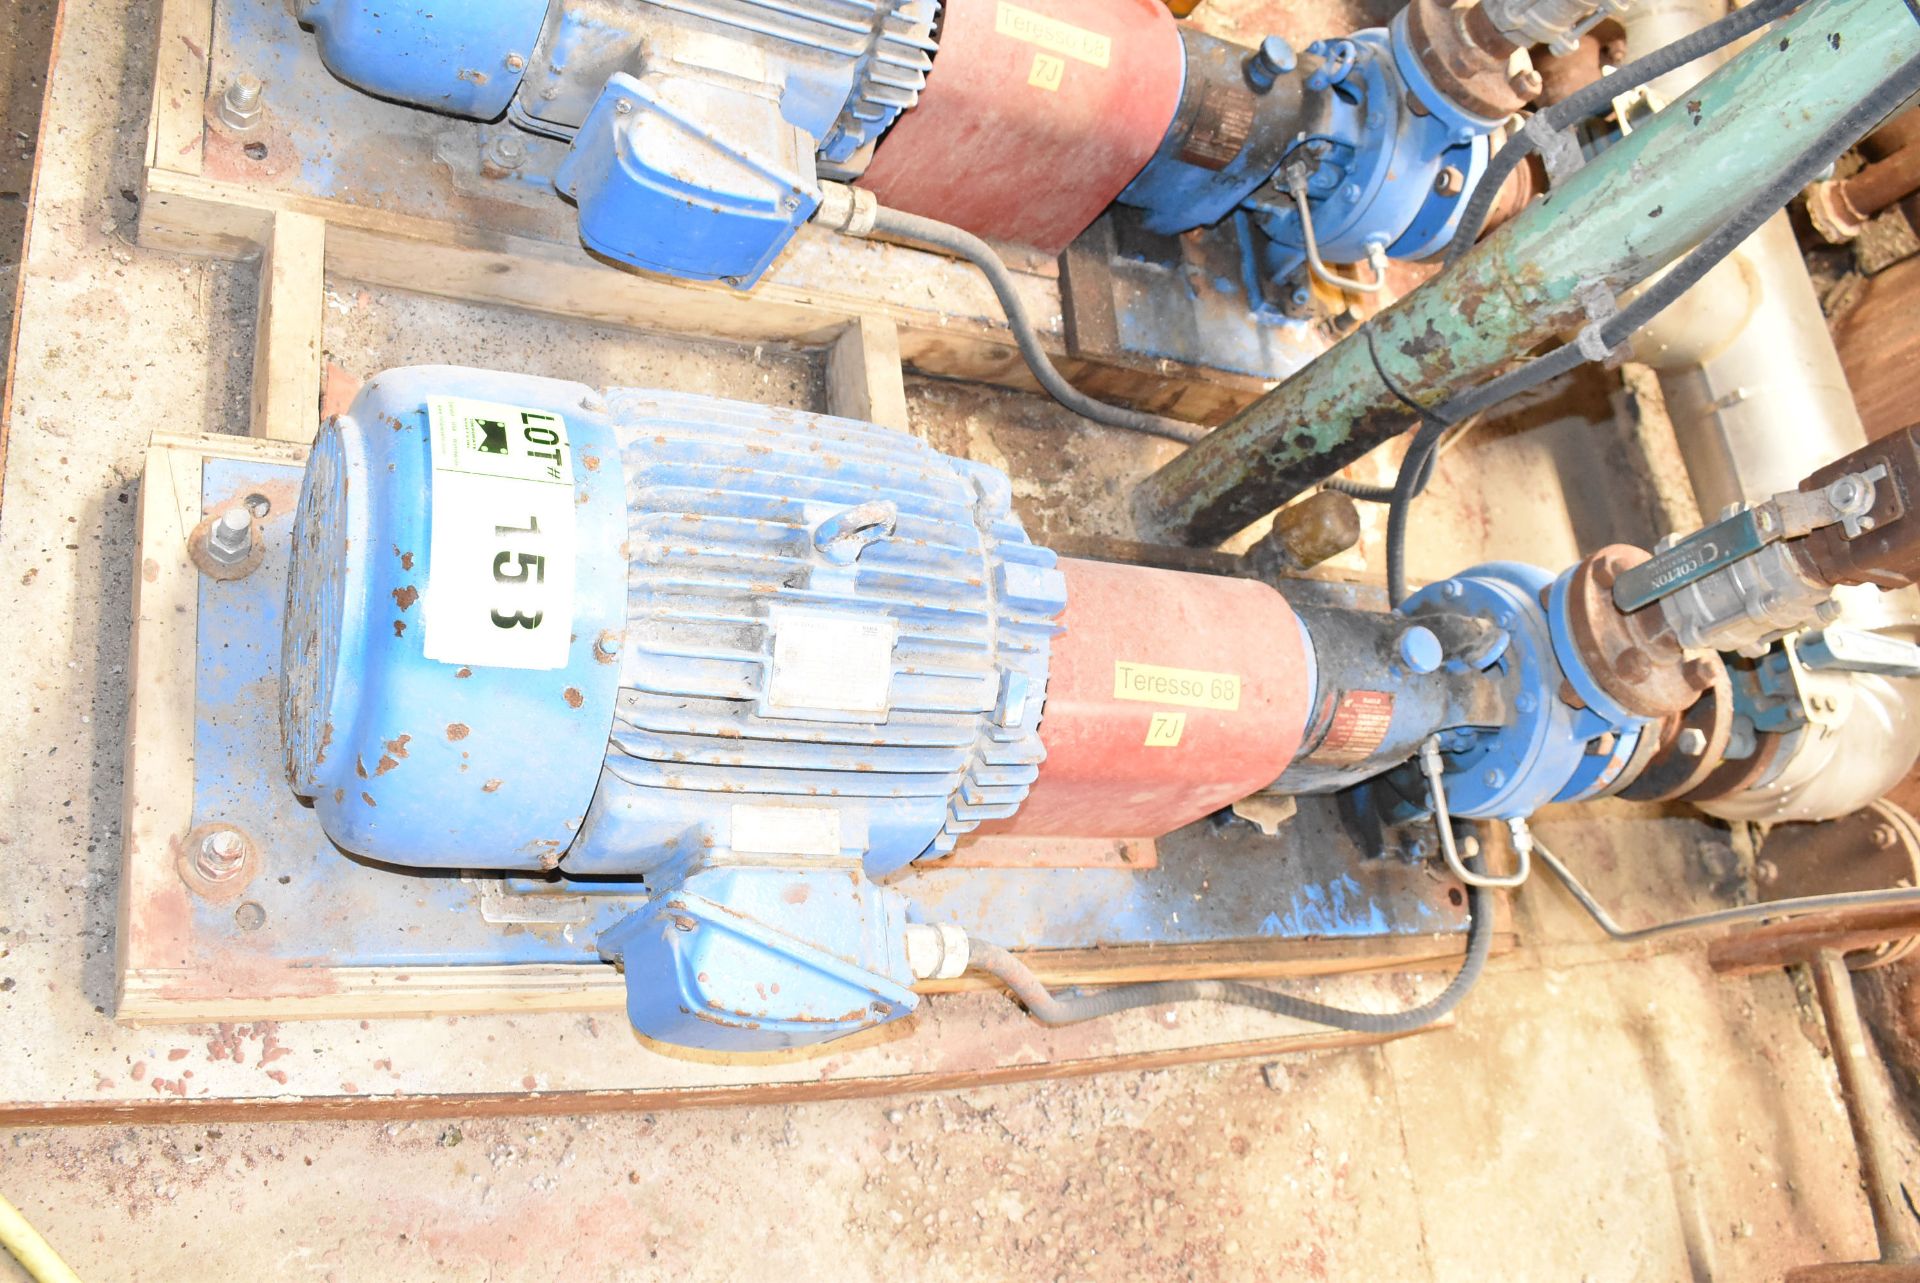 OPTIM TEFC 15HP, 3525RPM MOTOR AND EAGLE A100-S PUMP 3X2-6C SIZE 150 USGPM CAPACITY, 150FT 65PSI,